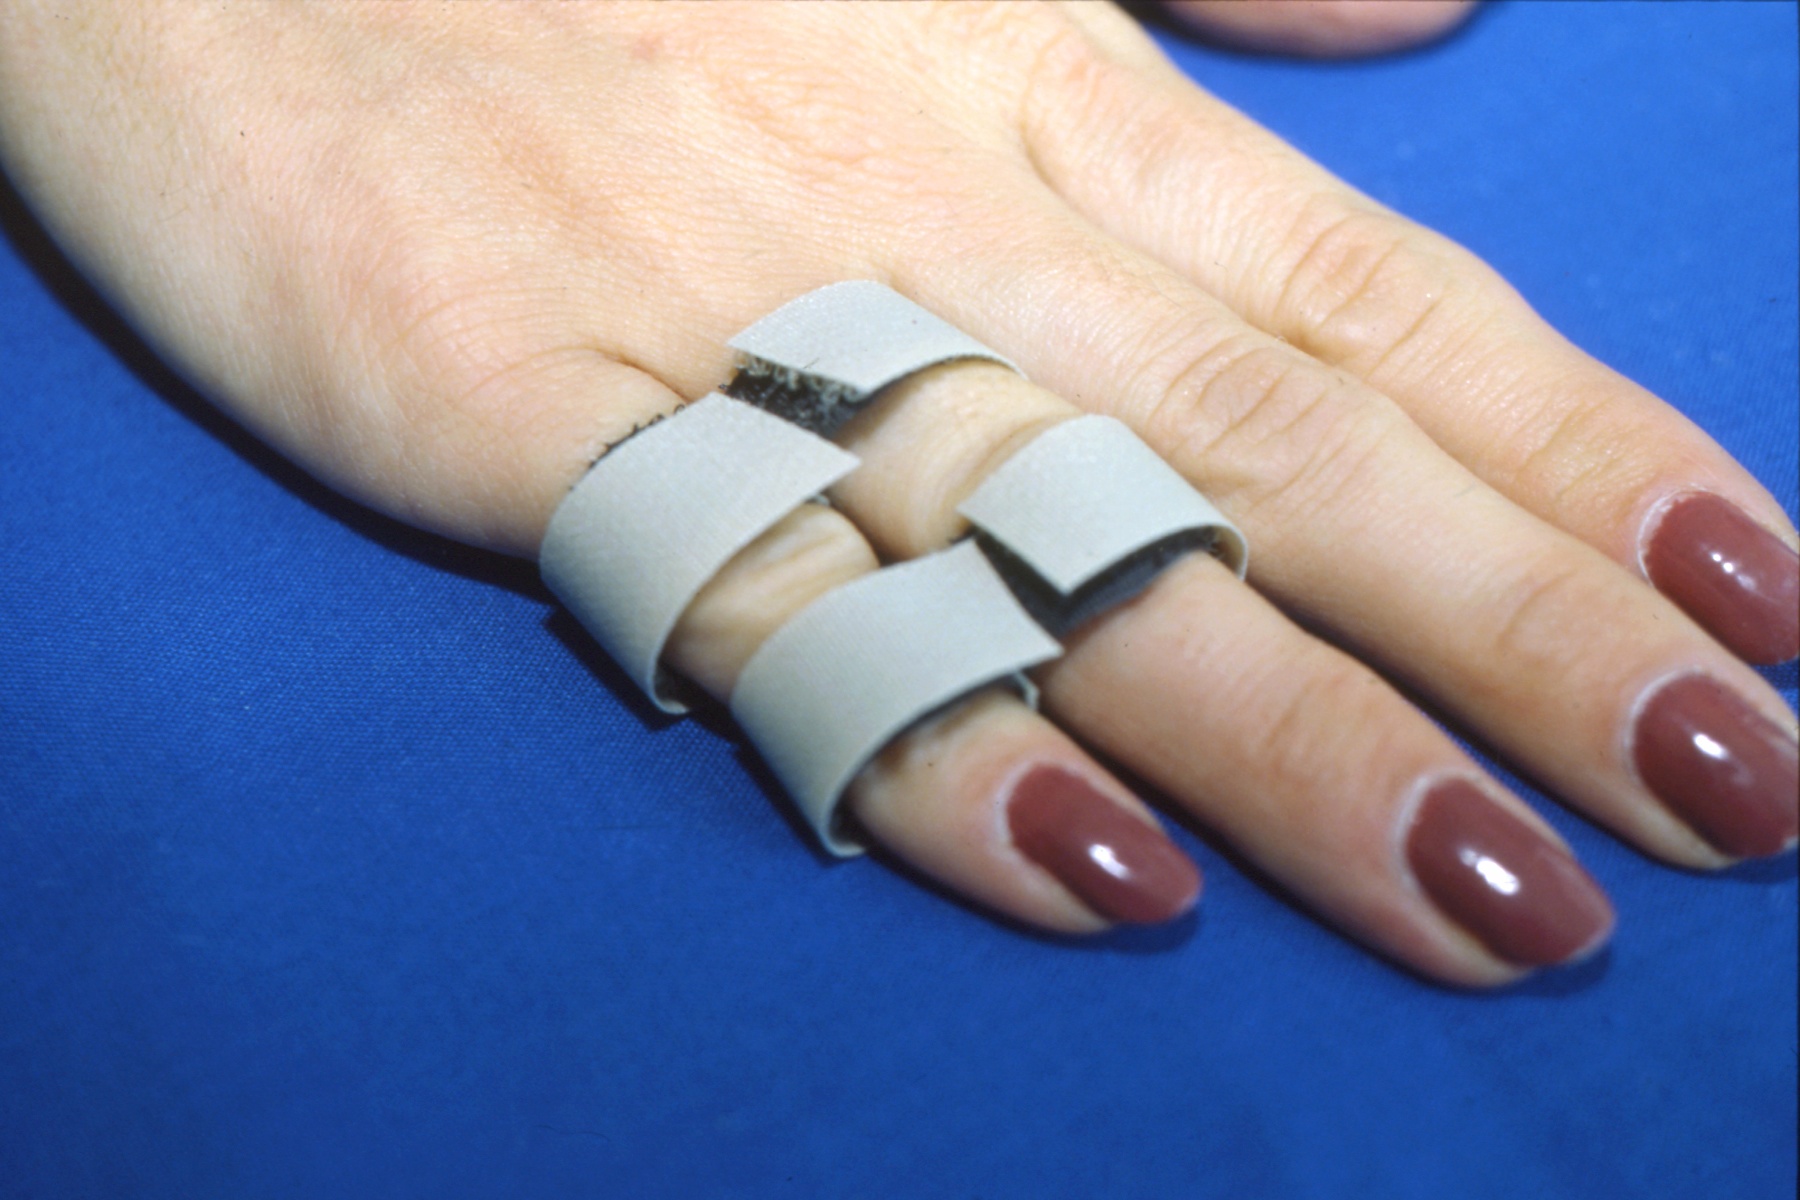 For stable and anatomically reduced PIP dislocations, buddy tape splinting and early active ROM may be the only treatment needed.